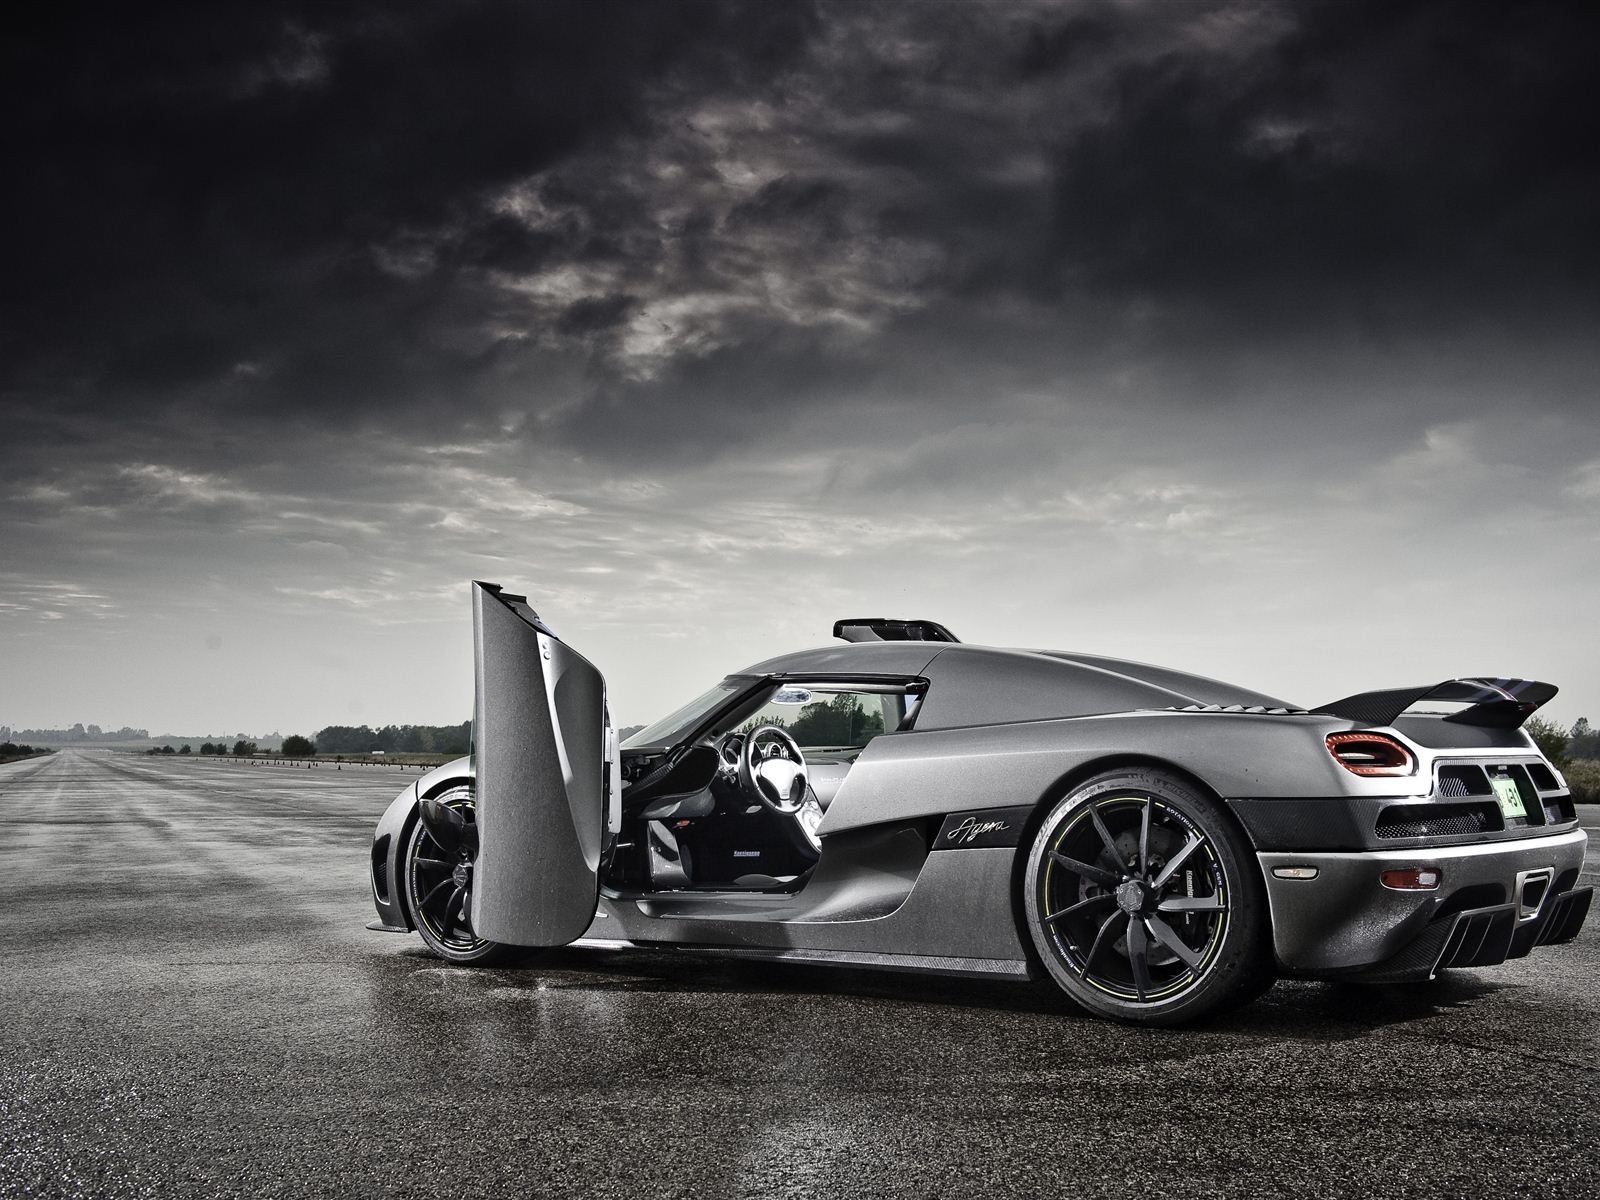 The Koenigsegg Agera is a 2 door coupe with a starting MSRP of 1,400,000Top Speed 245